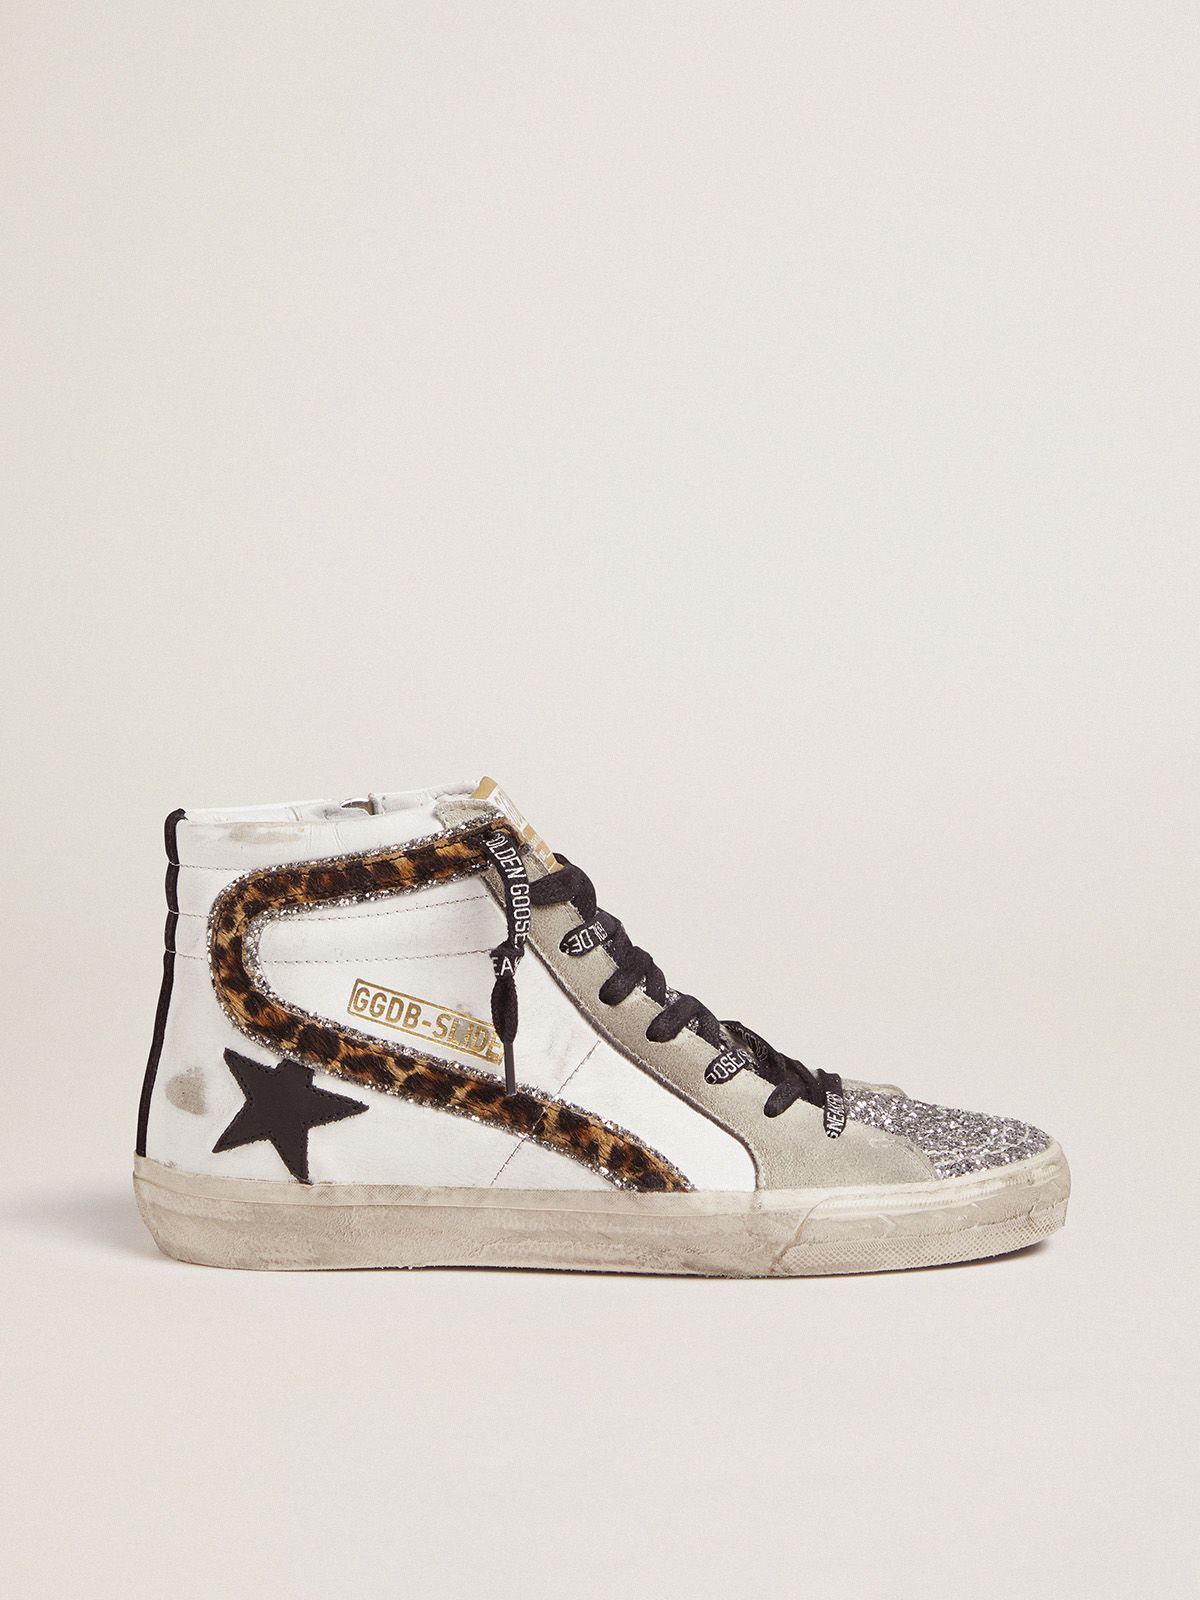 Slide sneakers with glitter and leopard-print flash | 